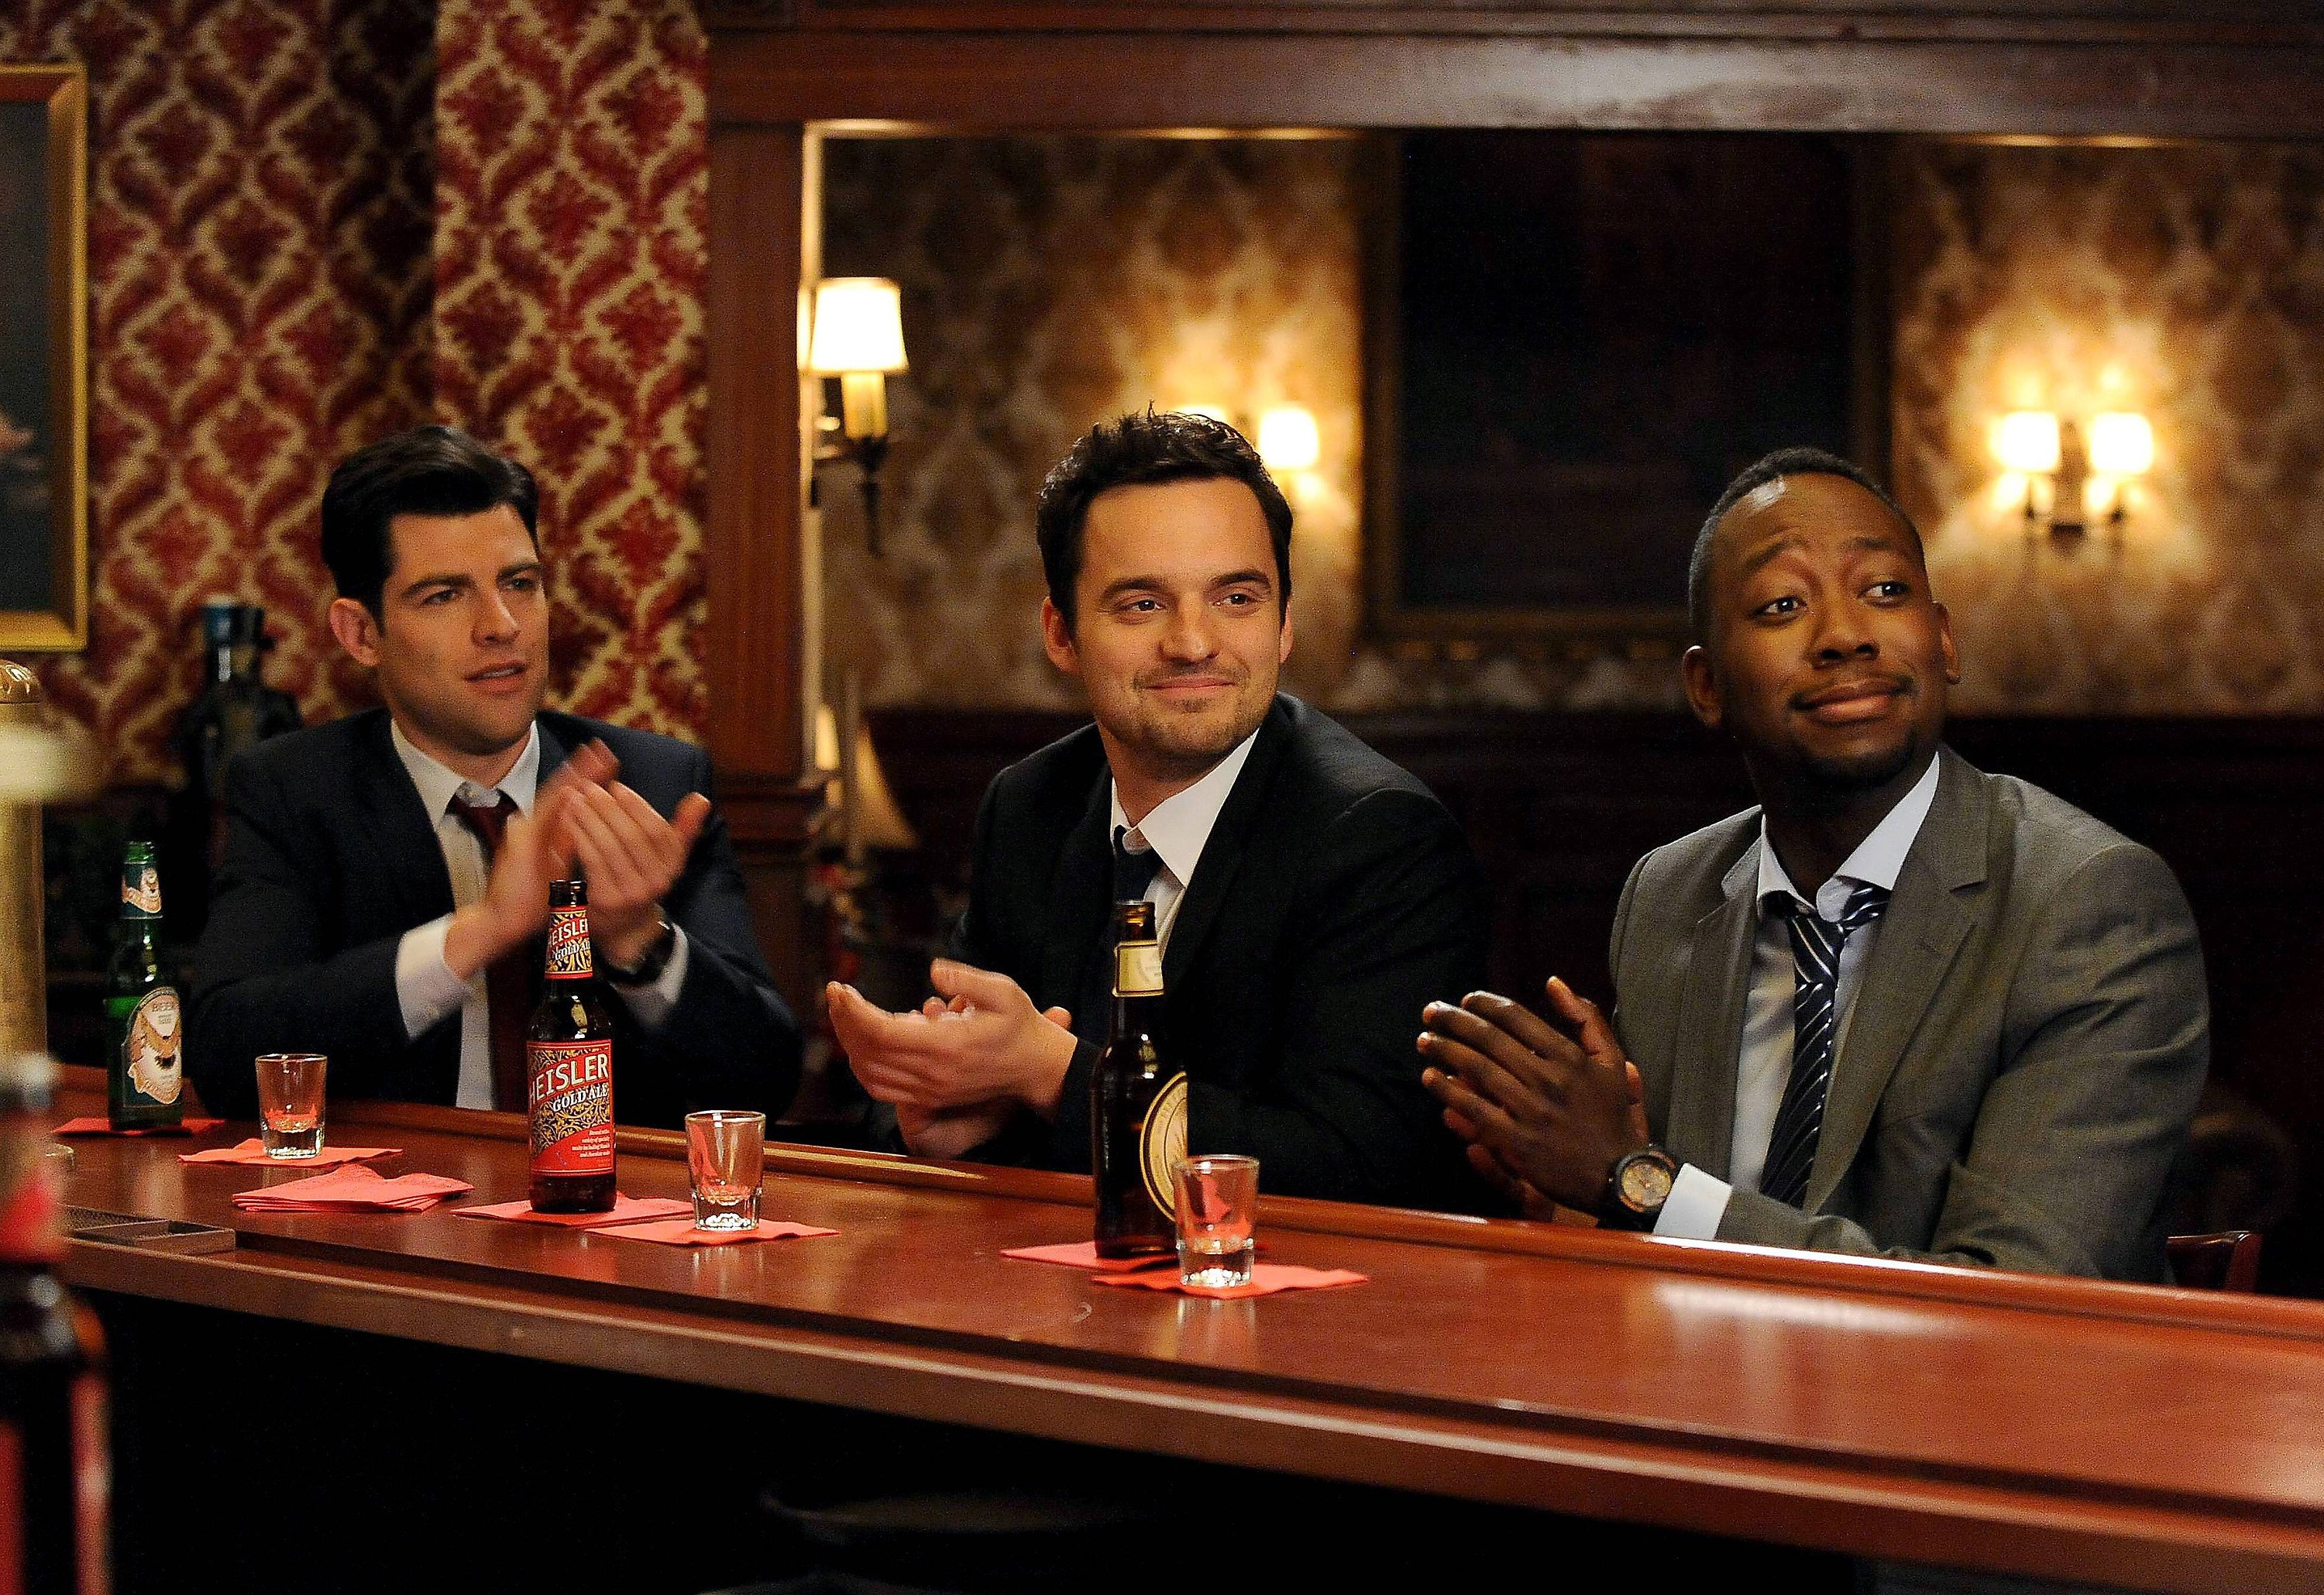 Max Greenfield, Jake Johnson and Lamorne Morris as Schmidt, Nick and Winston in 'New Girl'